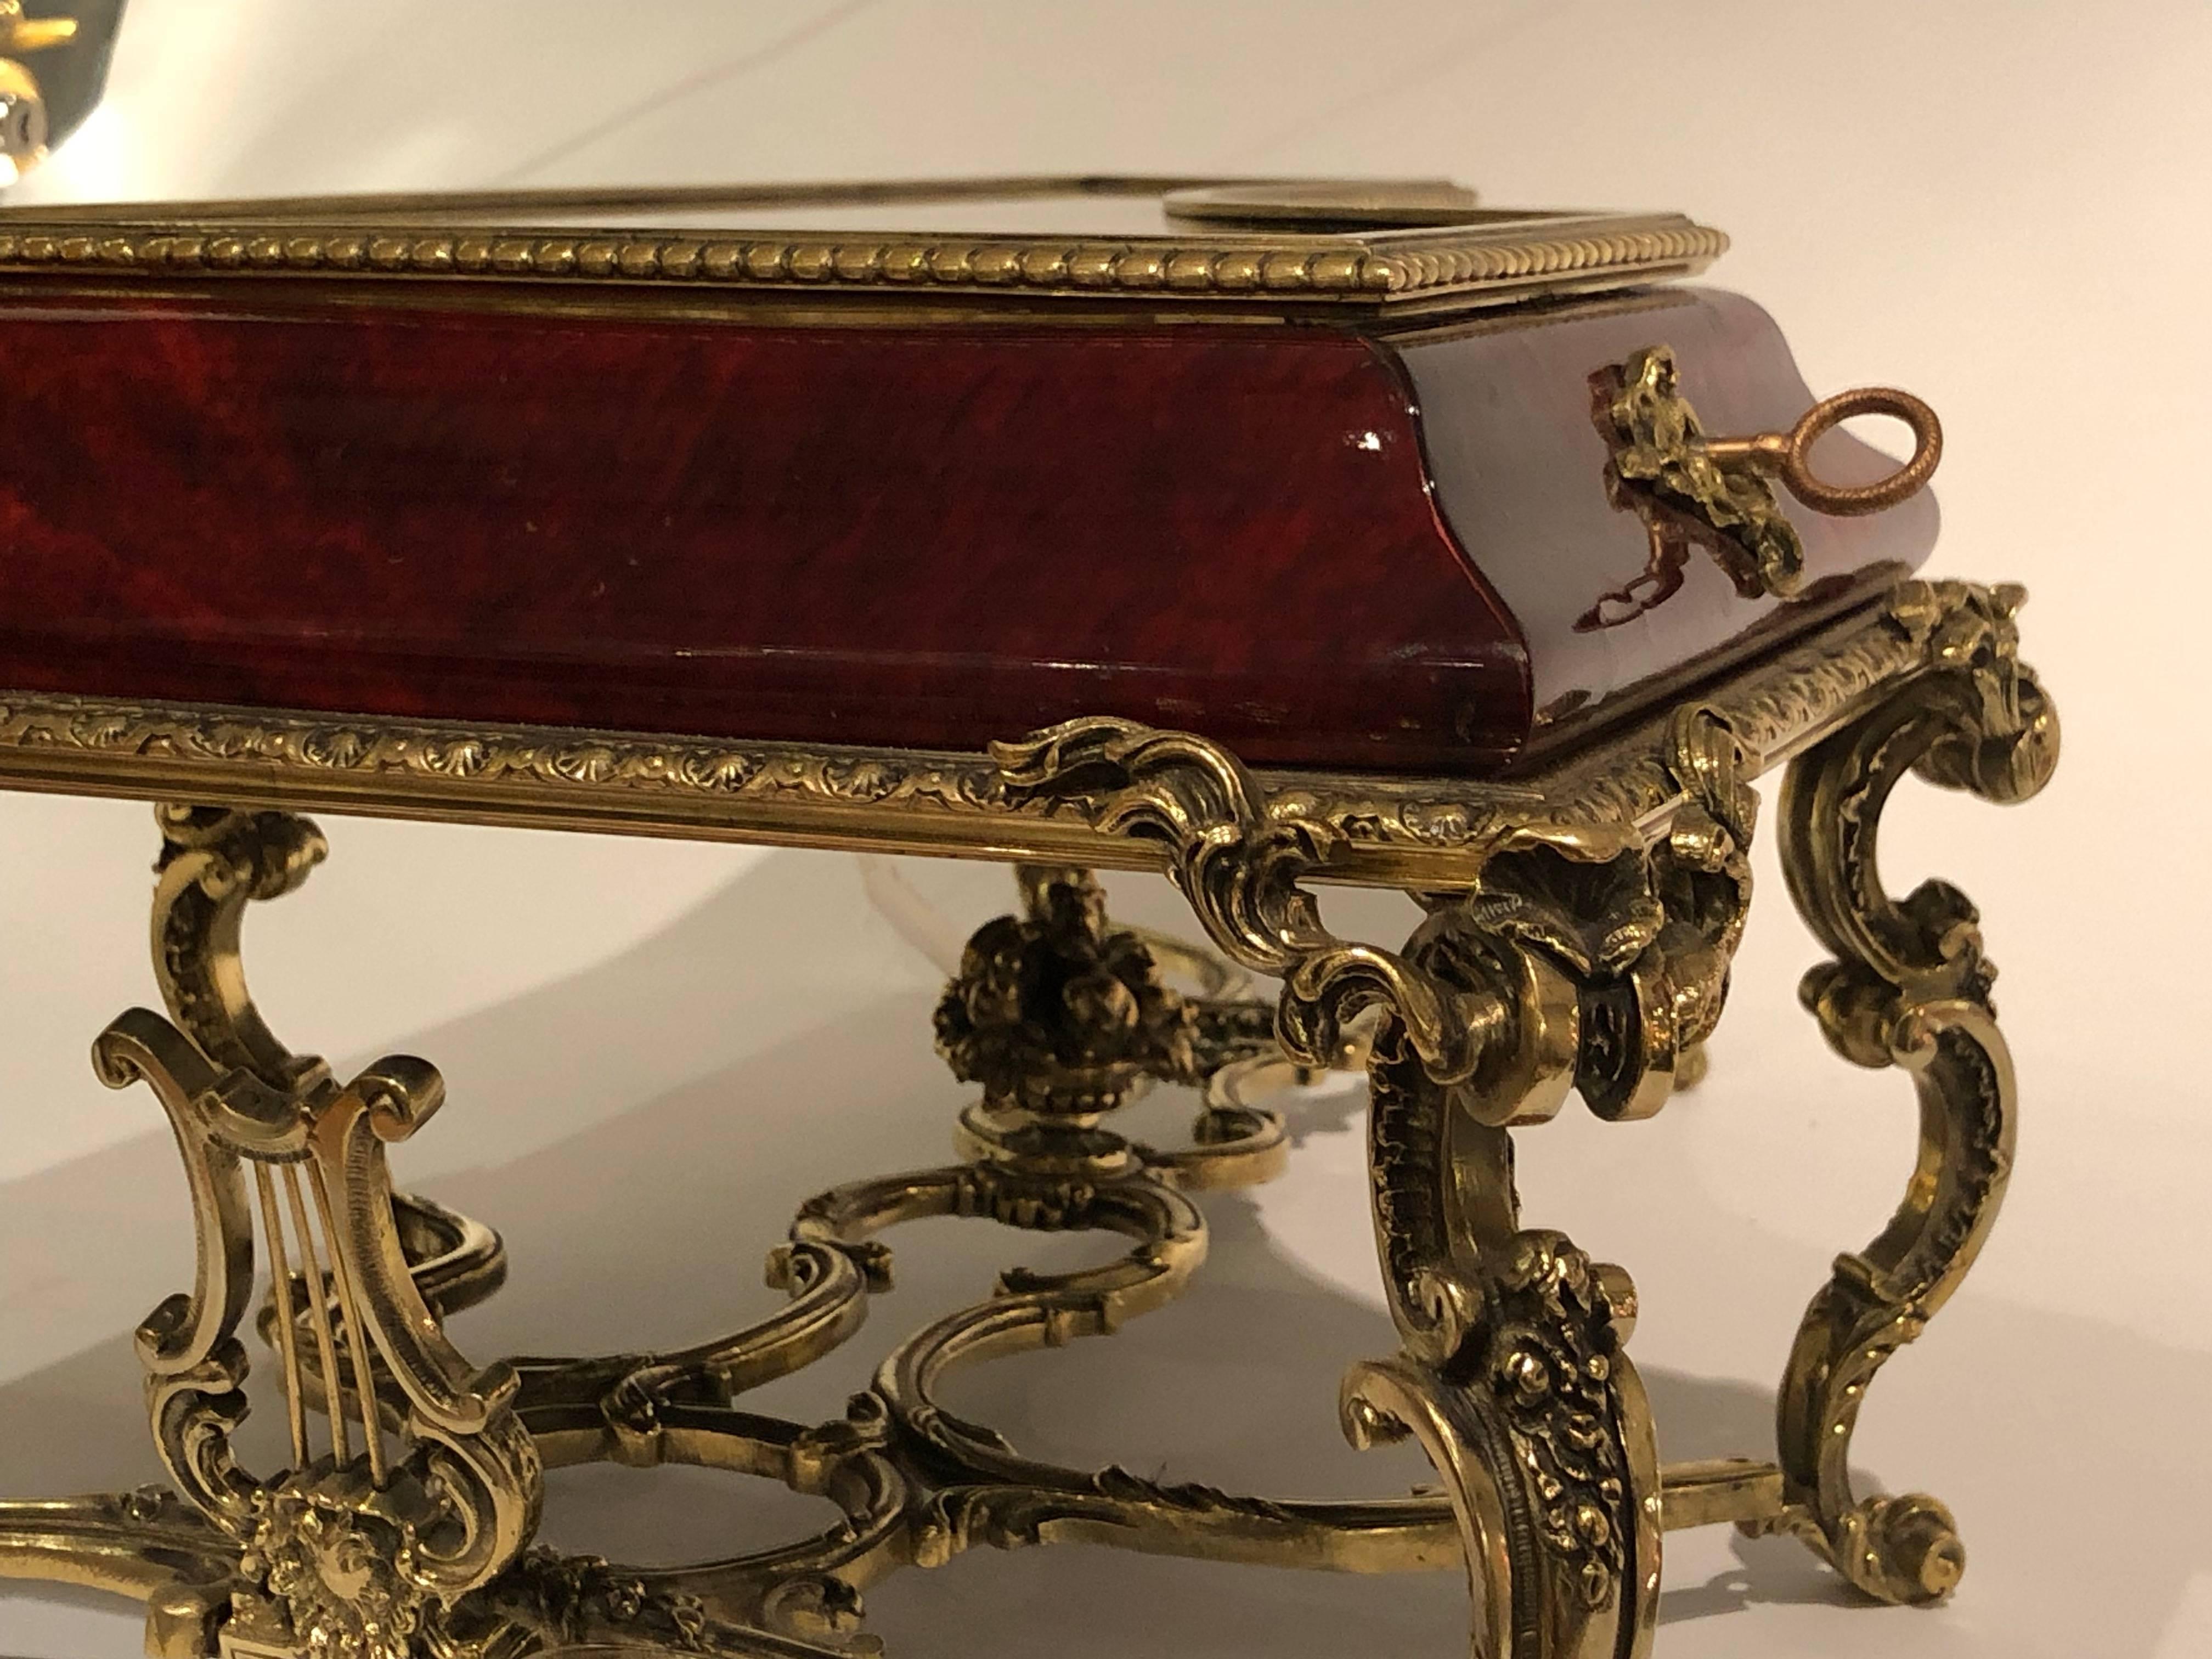 Faux Tortoiseshell and Ormolu Tabletop Vitrine in the Form of a Grand Piano 2